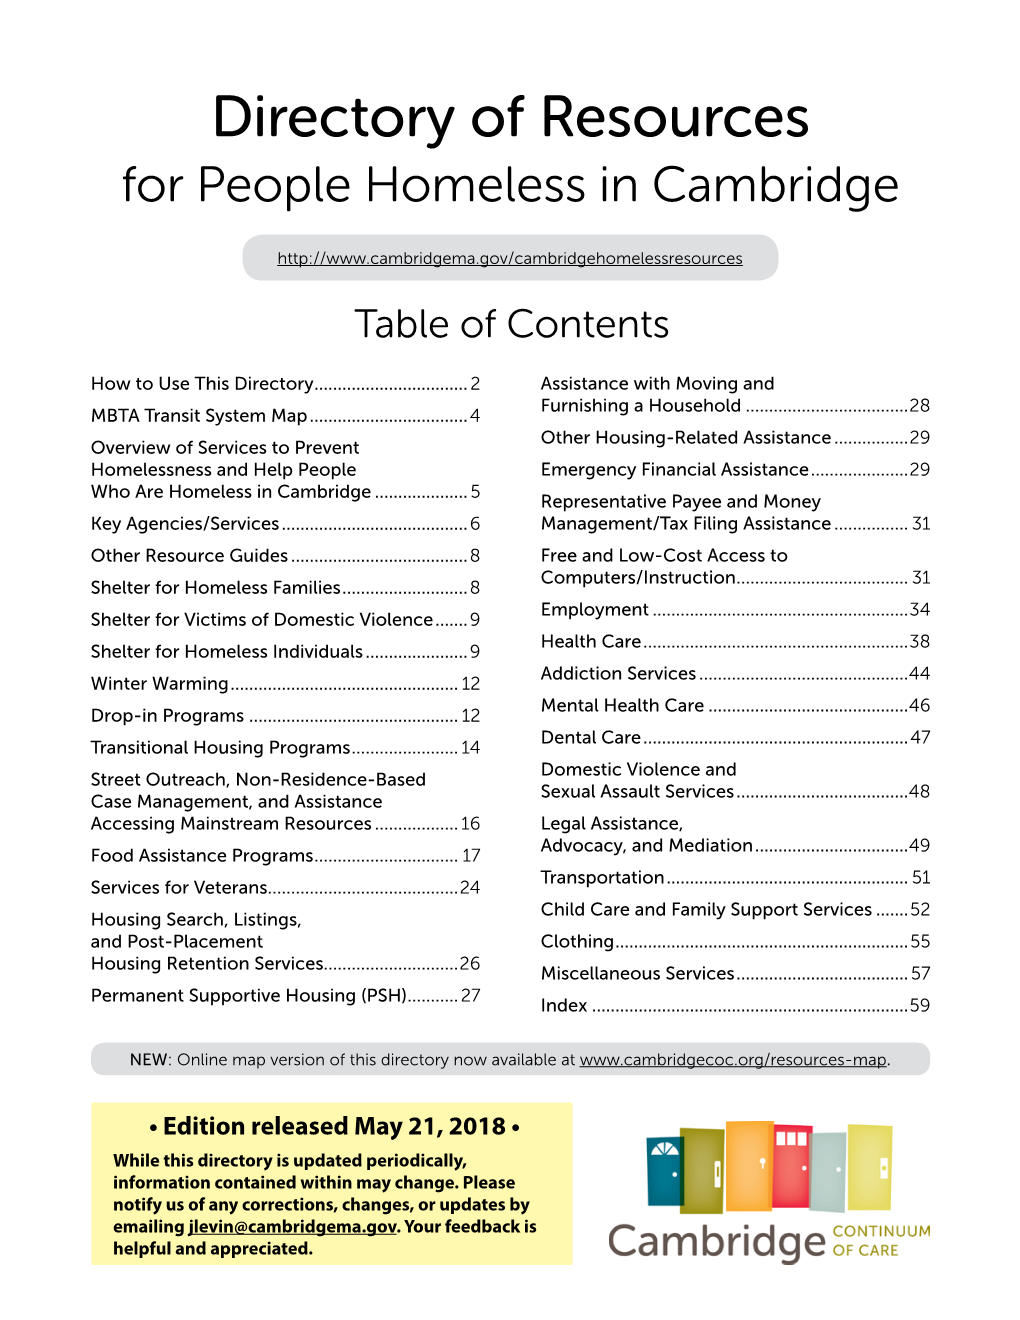 Directory of Resources for People Homeless in Cambridge